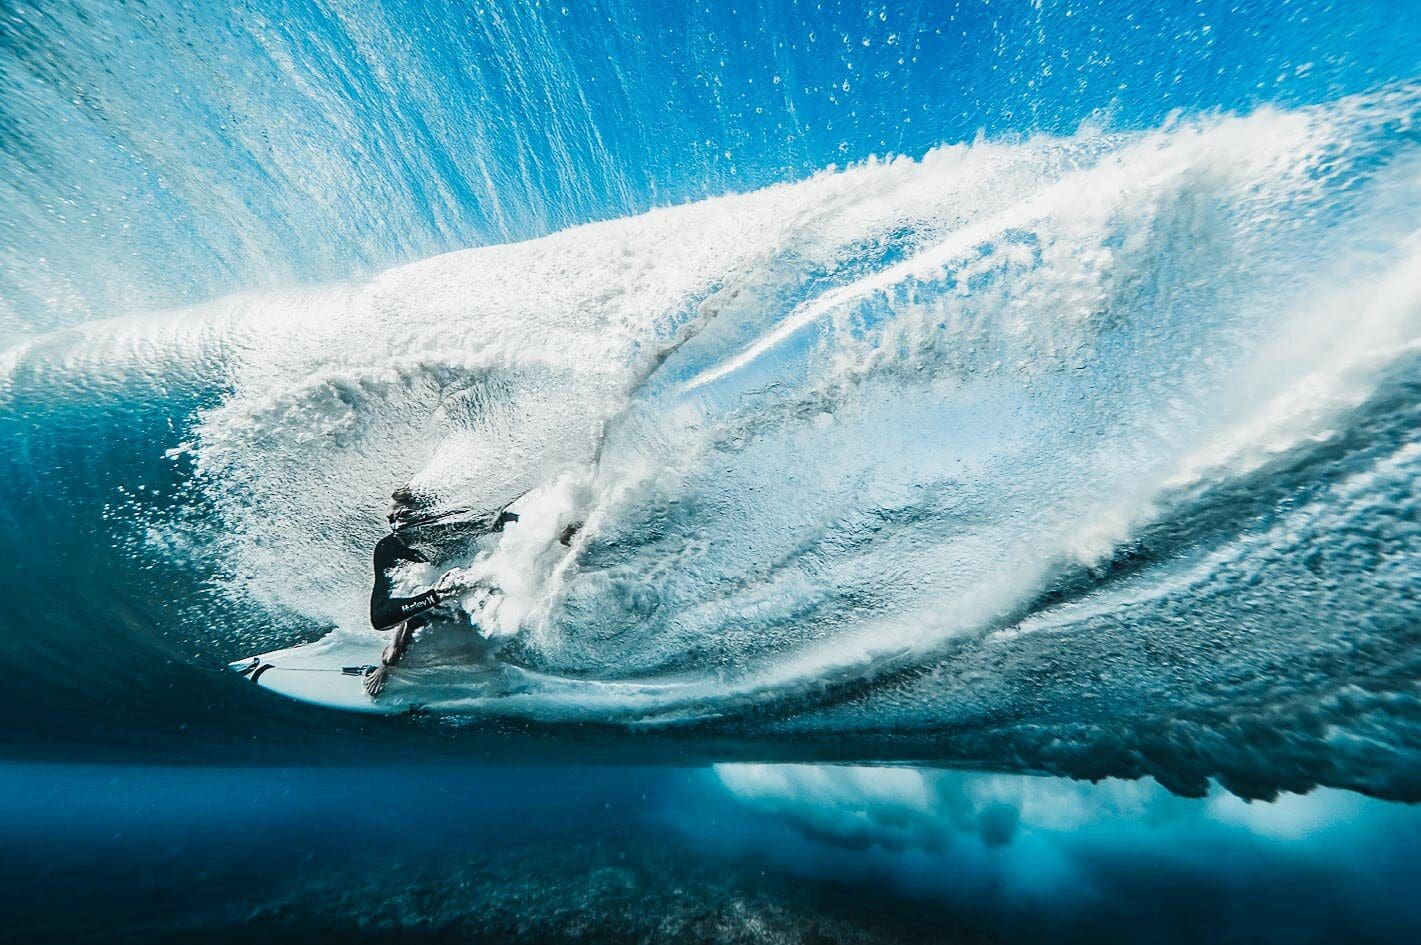 This image titled Energy by Ben Thouard is the 2019 Overall Winner & Energy Category winner of the RED BULL ILLUME , the world’s best adventure and action sports imagery contest. This image captures surfer Ace Buchan in action in Tahiti, French Polynesia. Photo by Ben Thouard and Red Bull Illume.